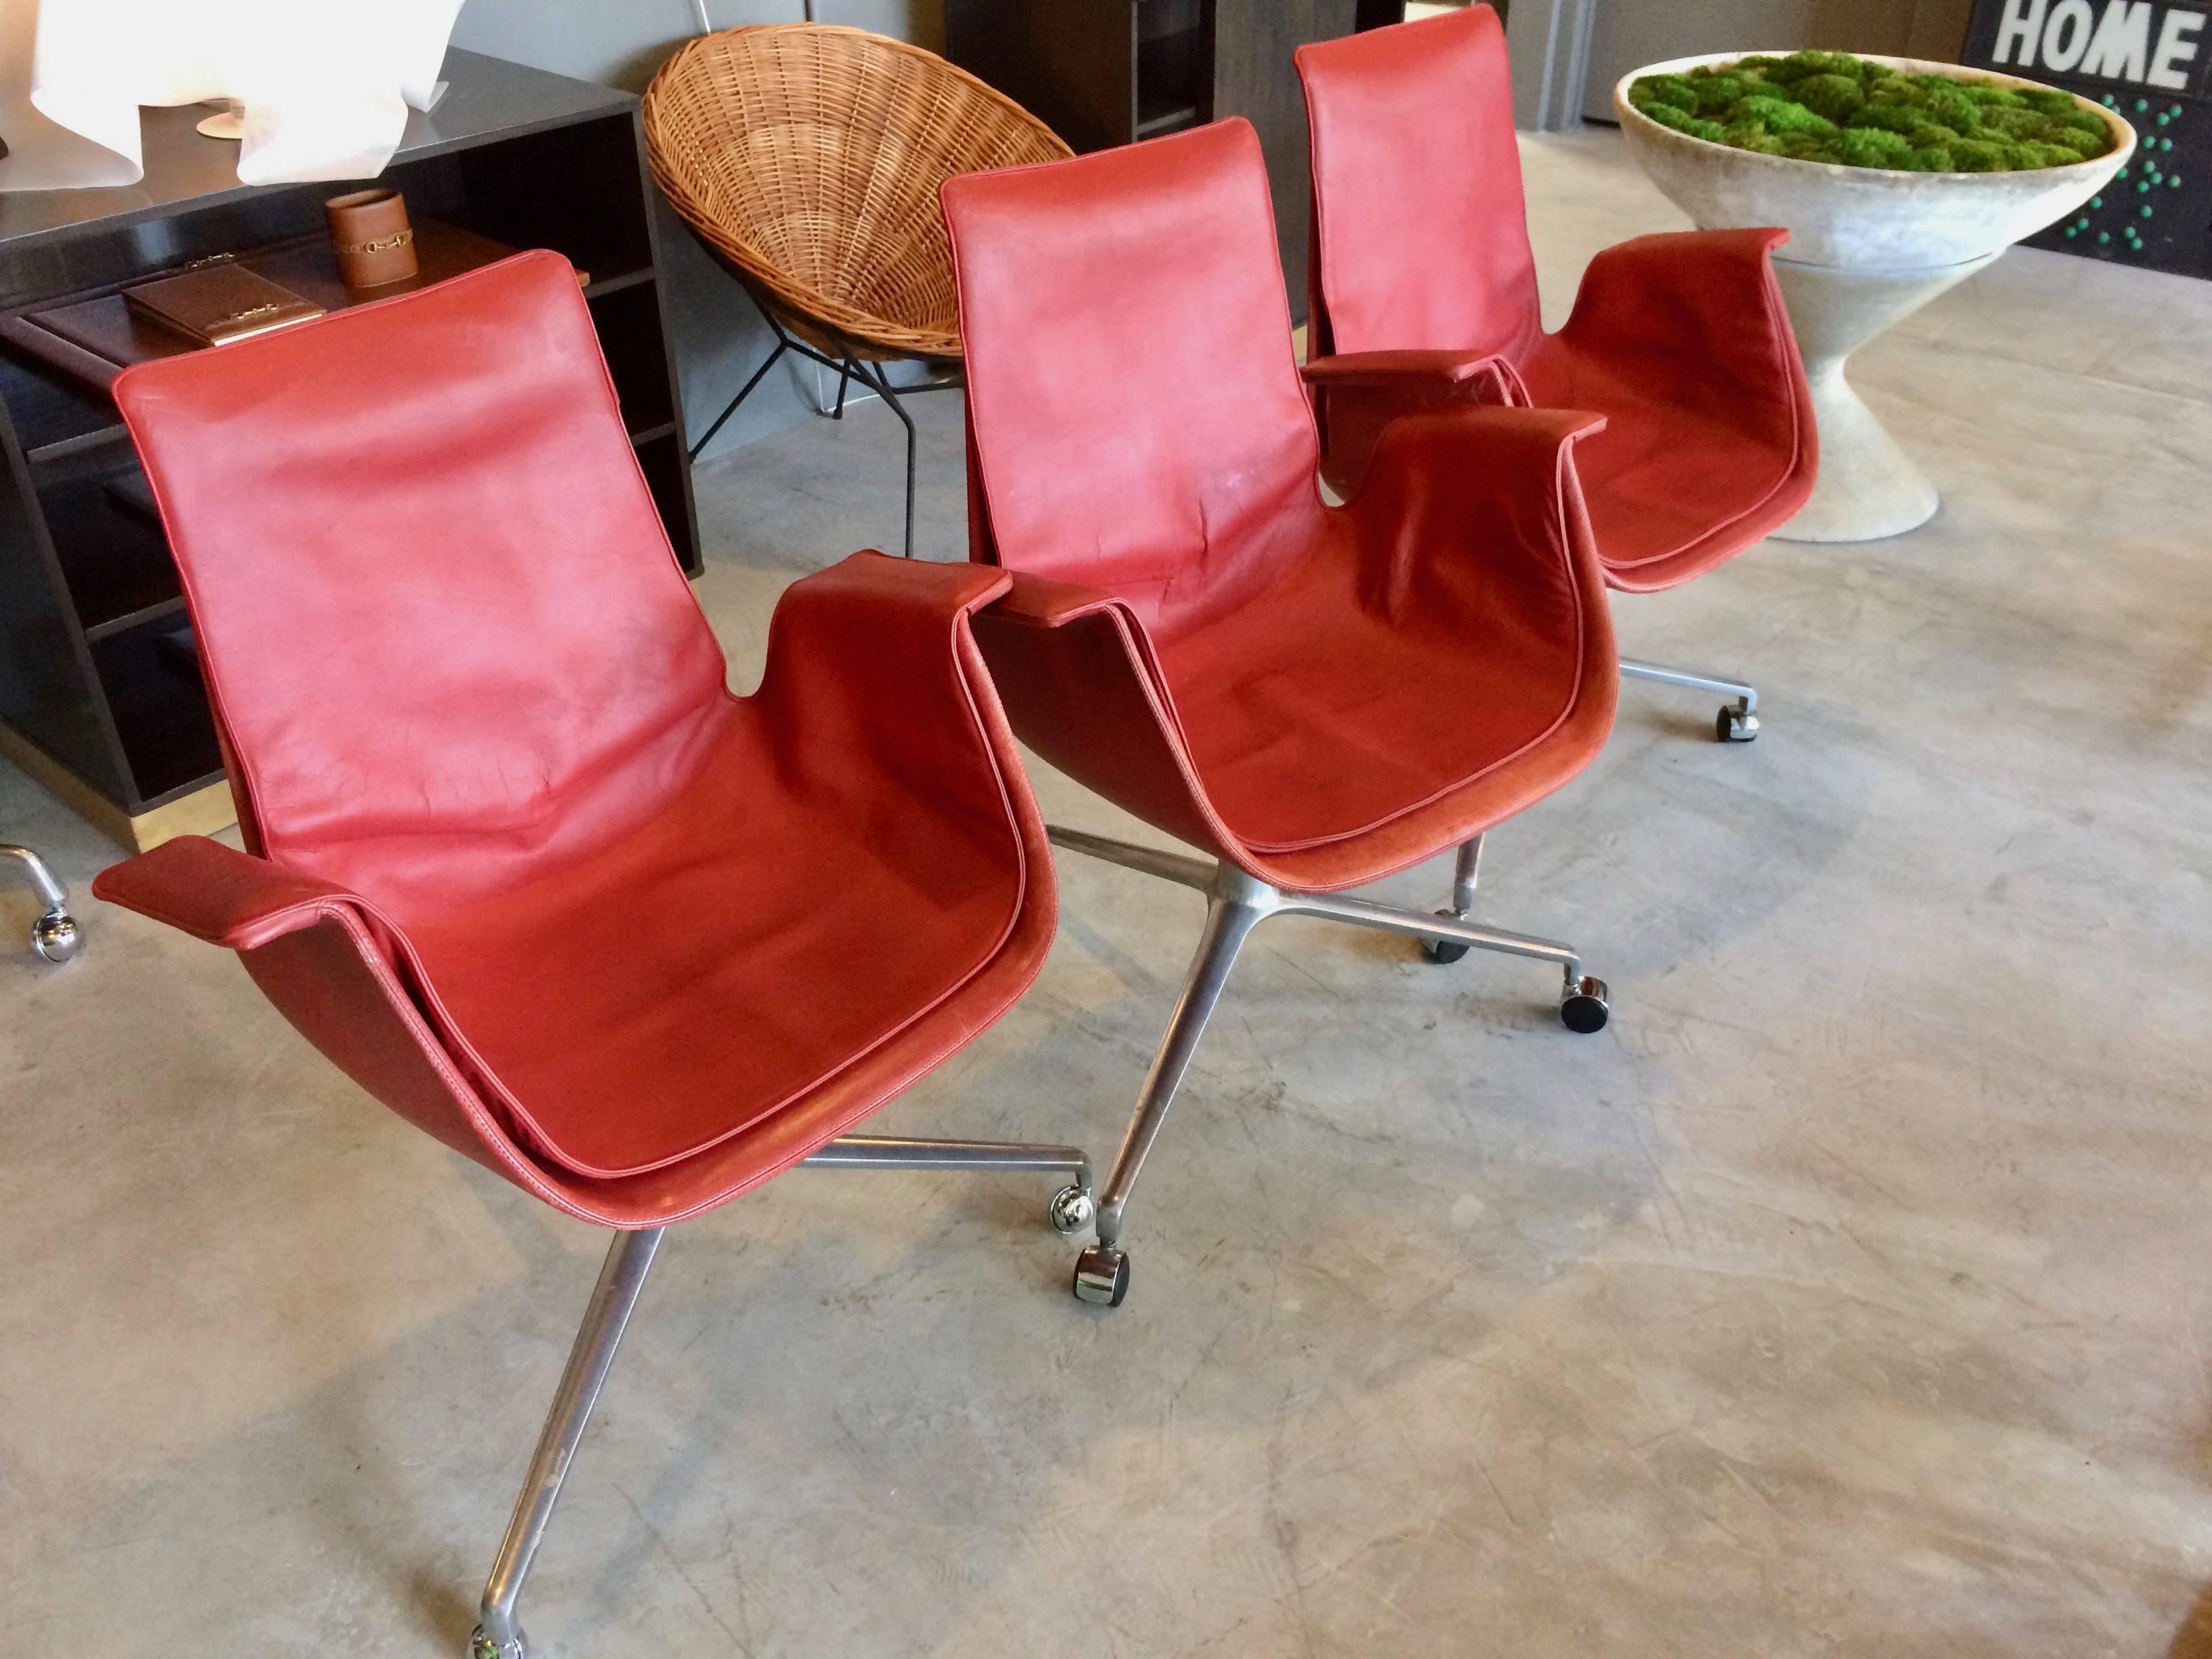 Timeless Preben Fabricius and Jørgen Kastholm desk chair in original deep red leather. Steel base. Original casters. Leather in excellent vintage condition. Only two still available. Priced individually.